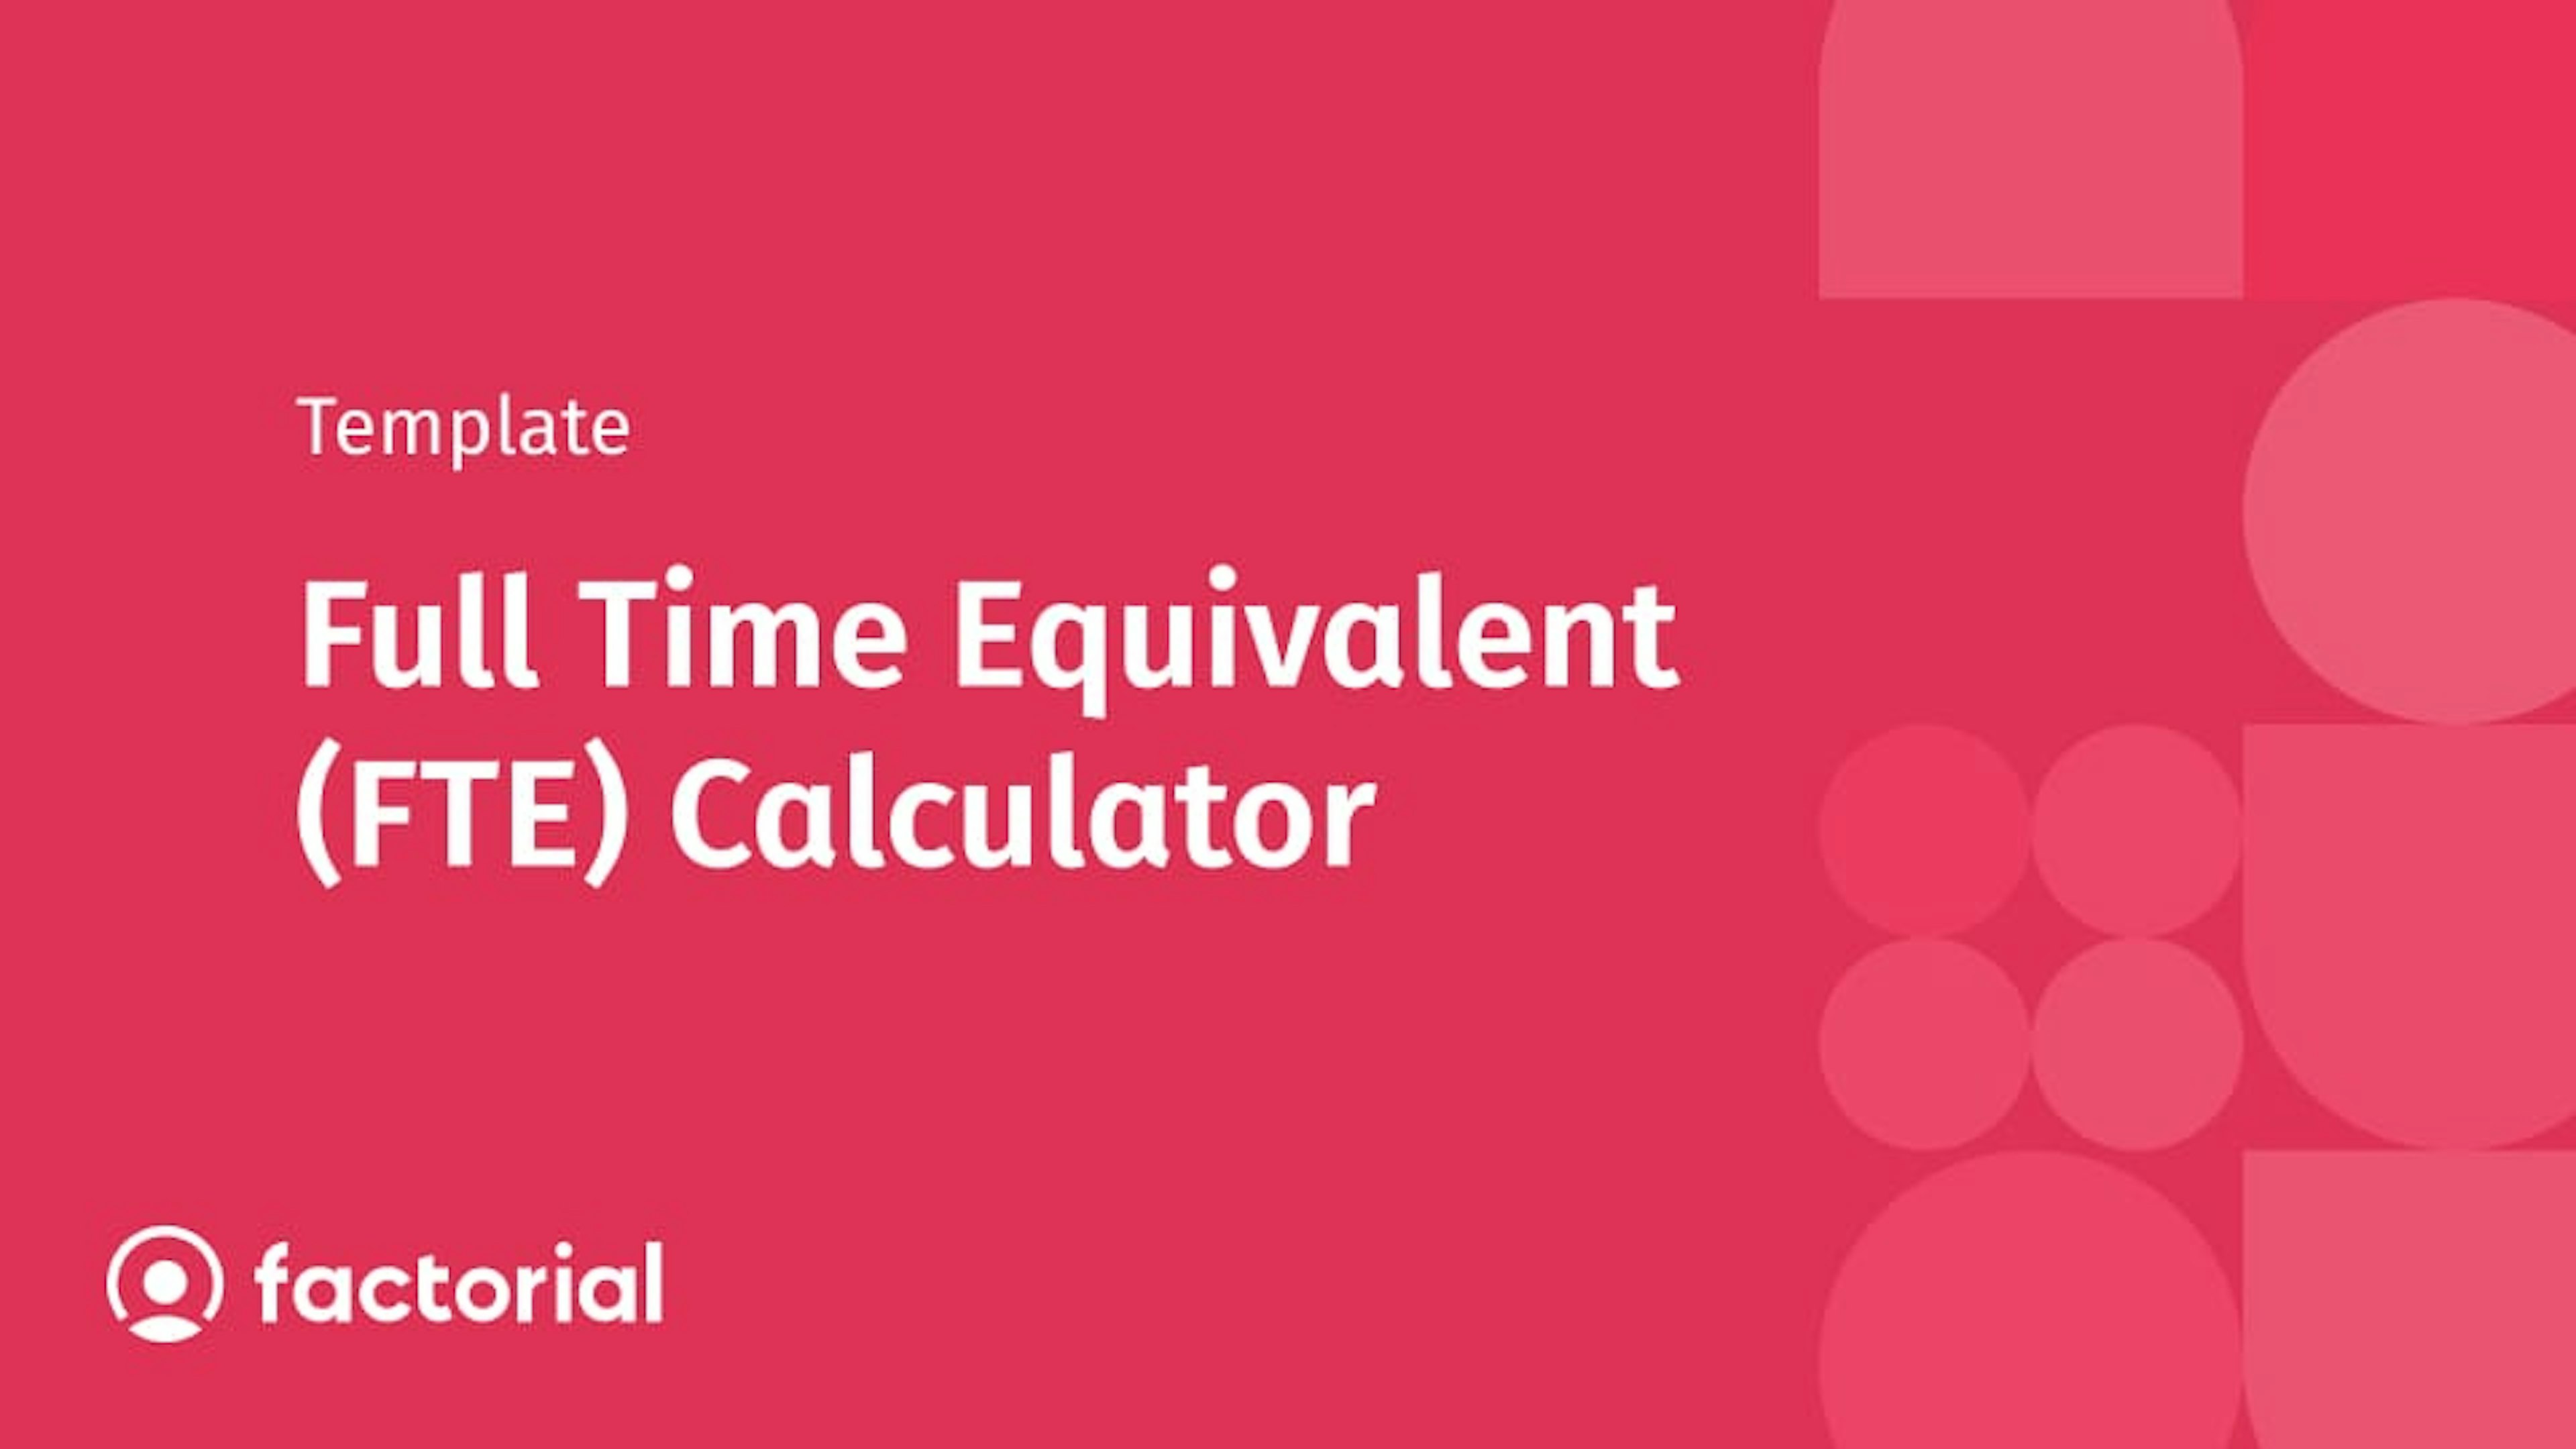 Full Time Equivalent (FTE) Calculator